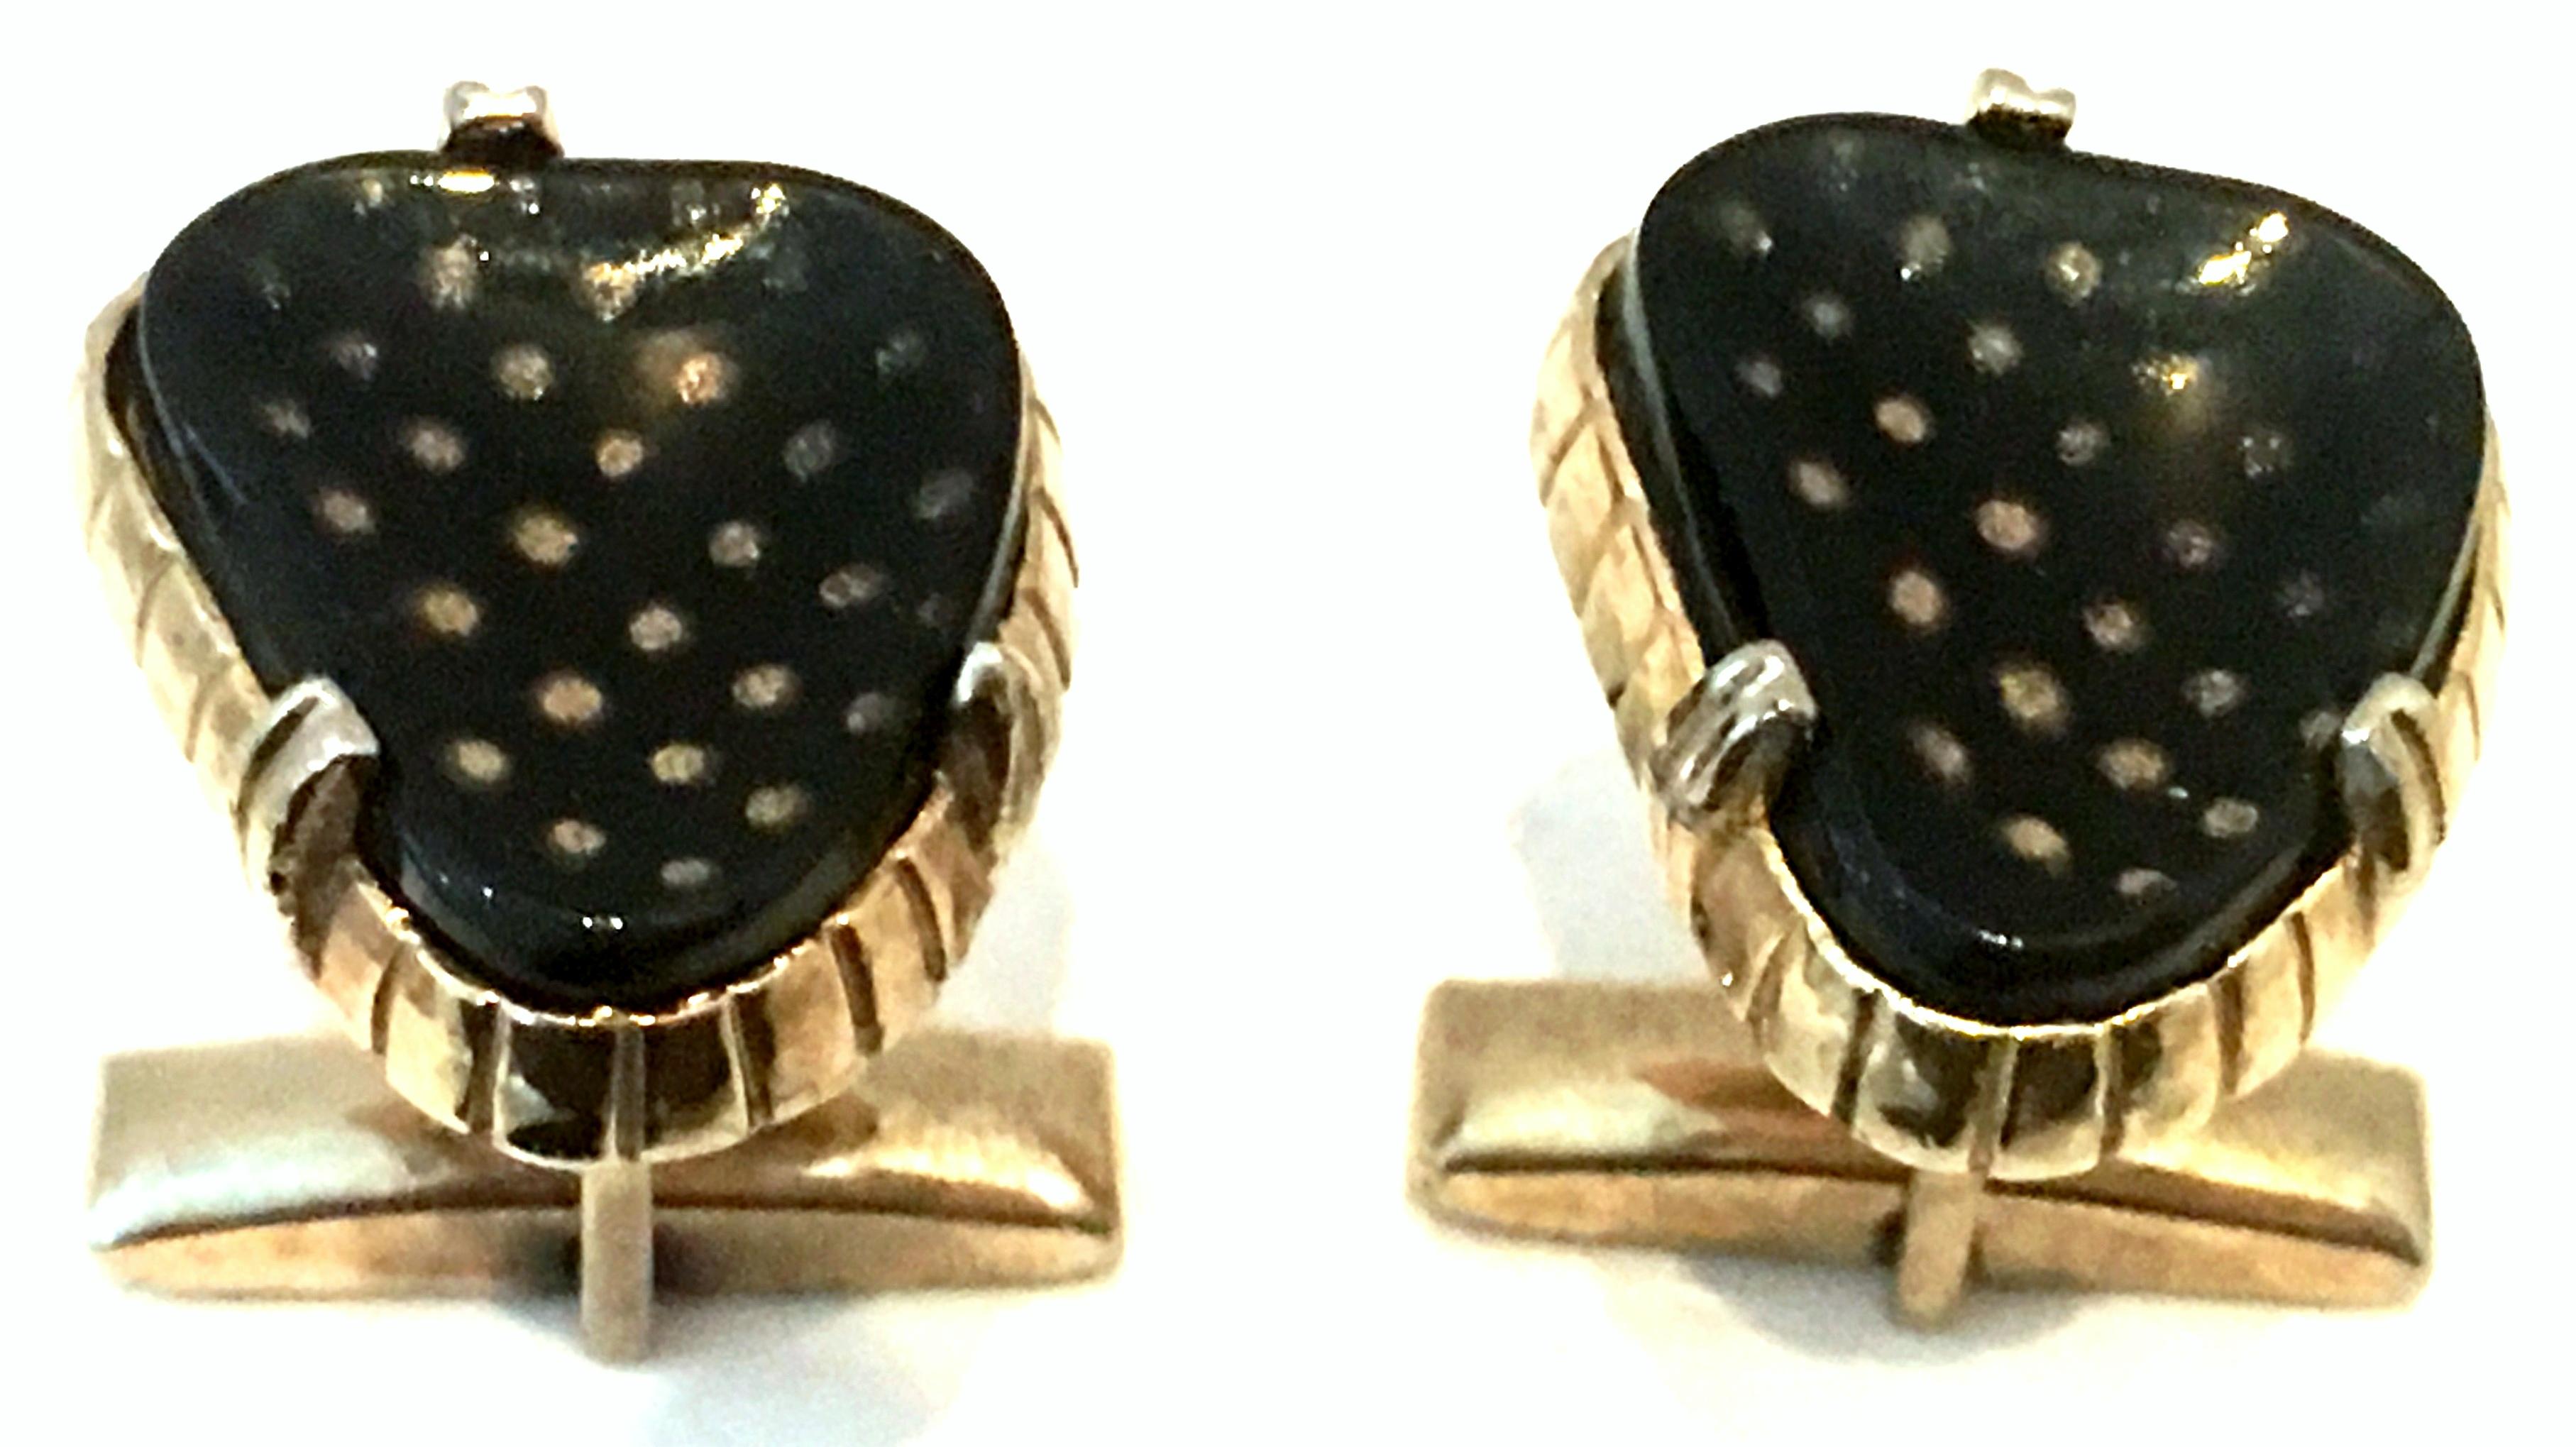 Modernist Mid-20th Century Gold Plate & Lucite Pair Of Cuff Links & Tie Clip S/3 For Sale